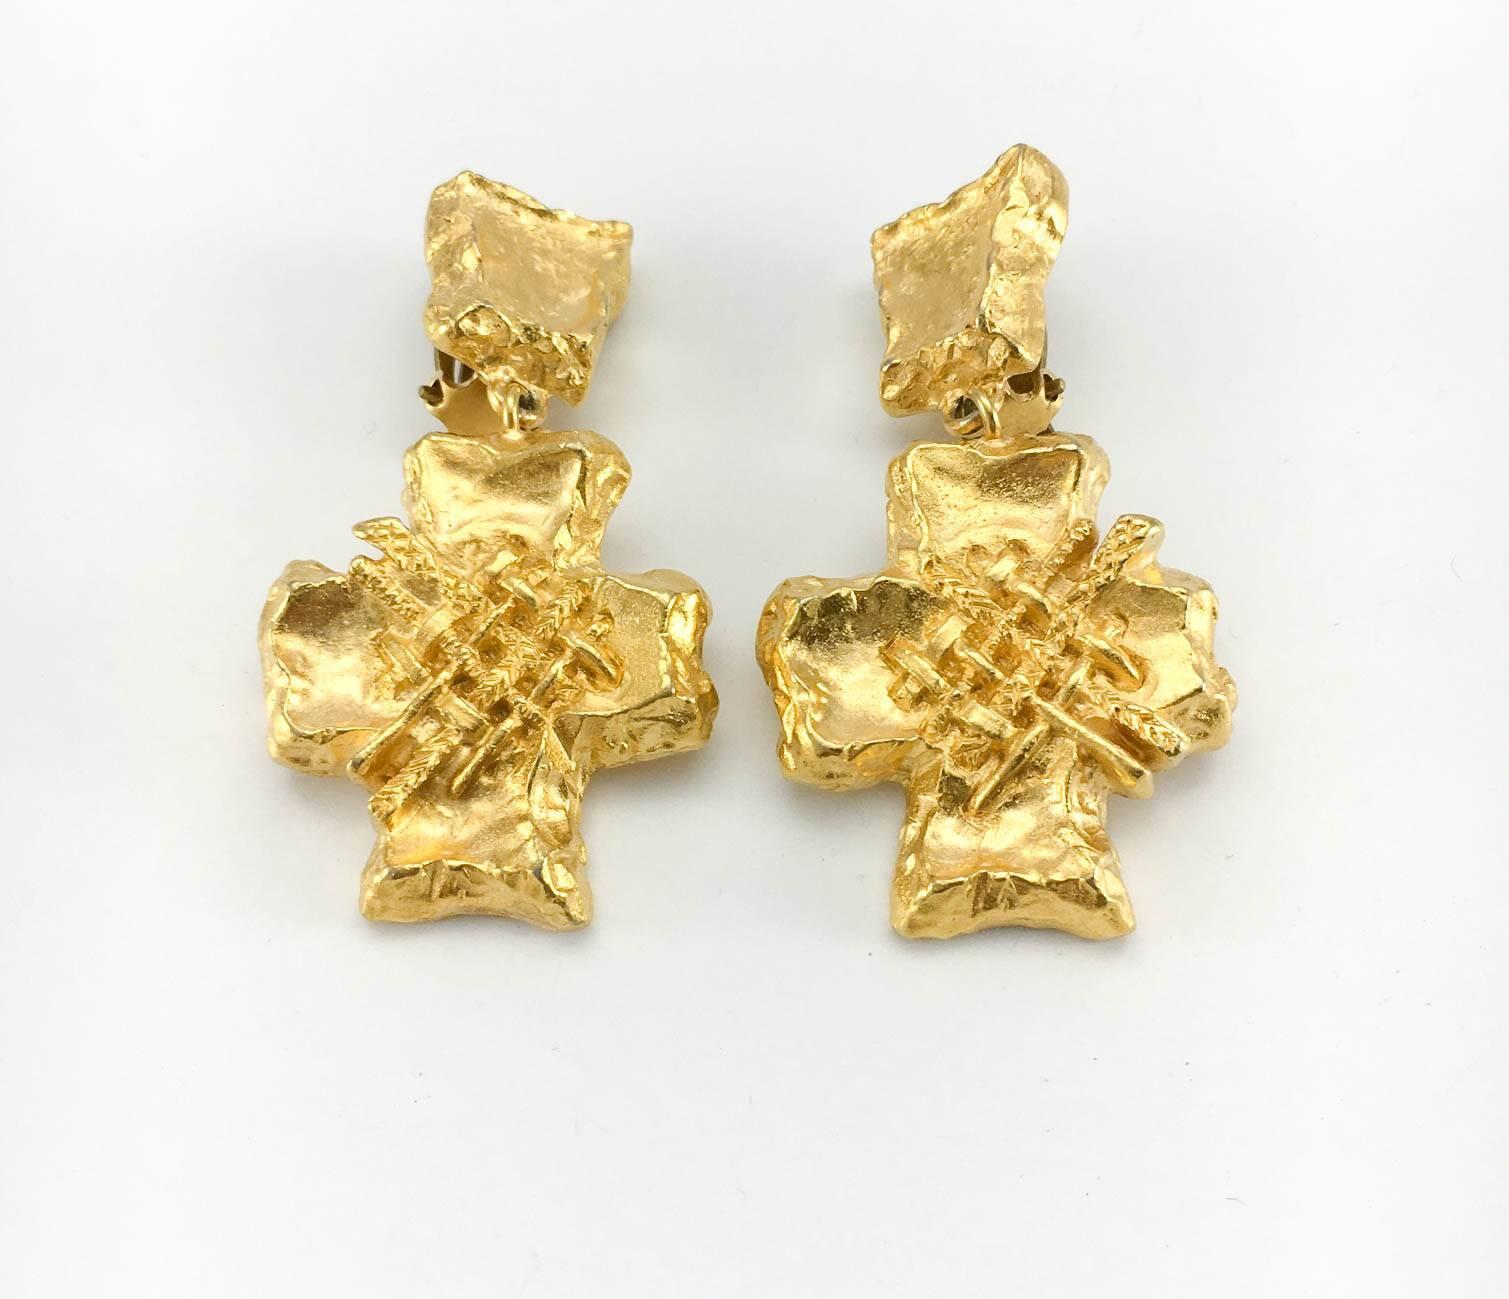 Superb Vintage Lacroix Gold-Plated Cross Dangling Earrings. These gorgeous clip-on earrings by Lacroix were made in the 1980s by Maison Goossens. The metalwork, giving it texture, the striking design and quality that give these earrings a luxurious